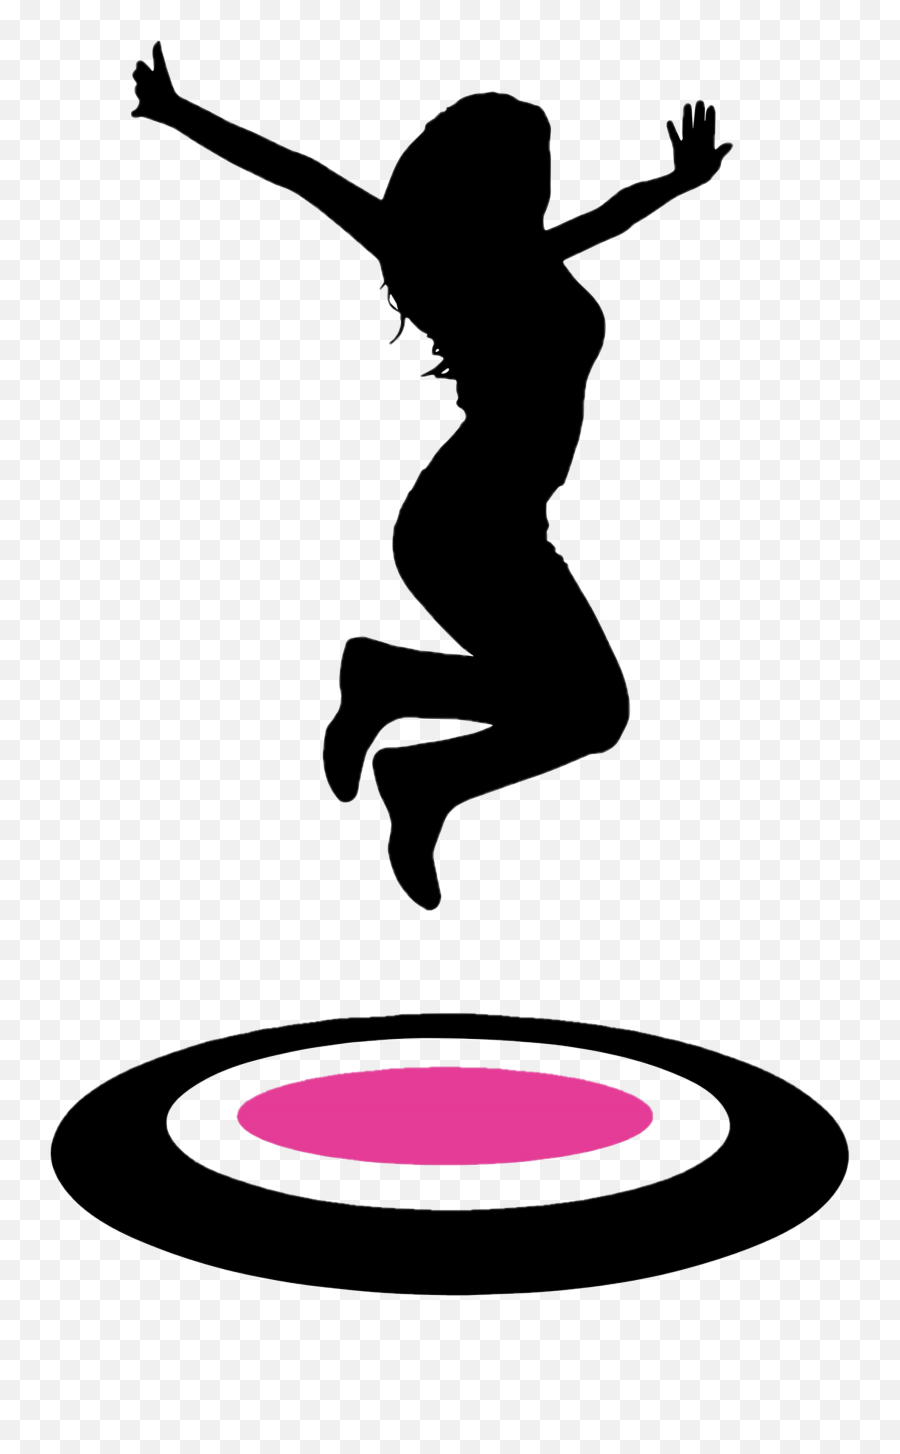 Posts Reboundfit - Jumping Silhouette Gif Emoji,Trampoline And Emotions